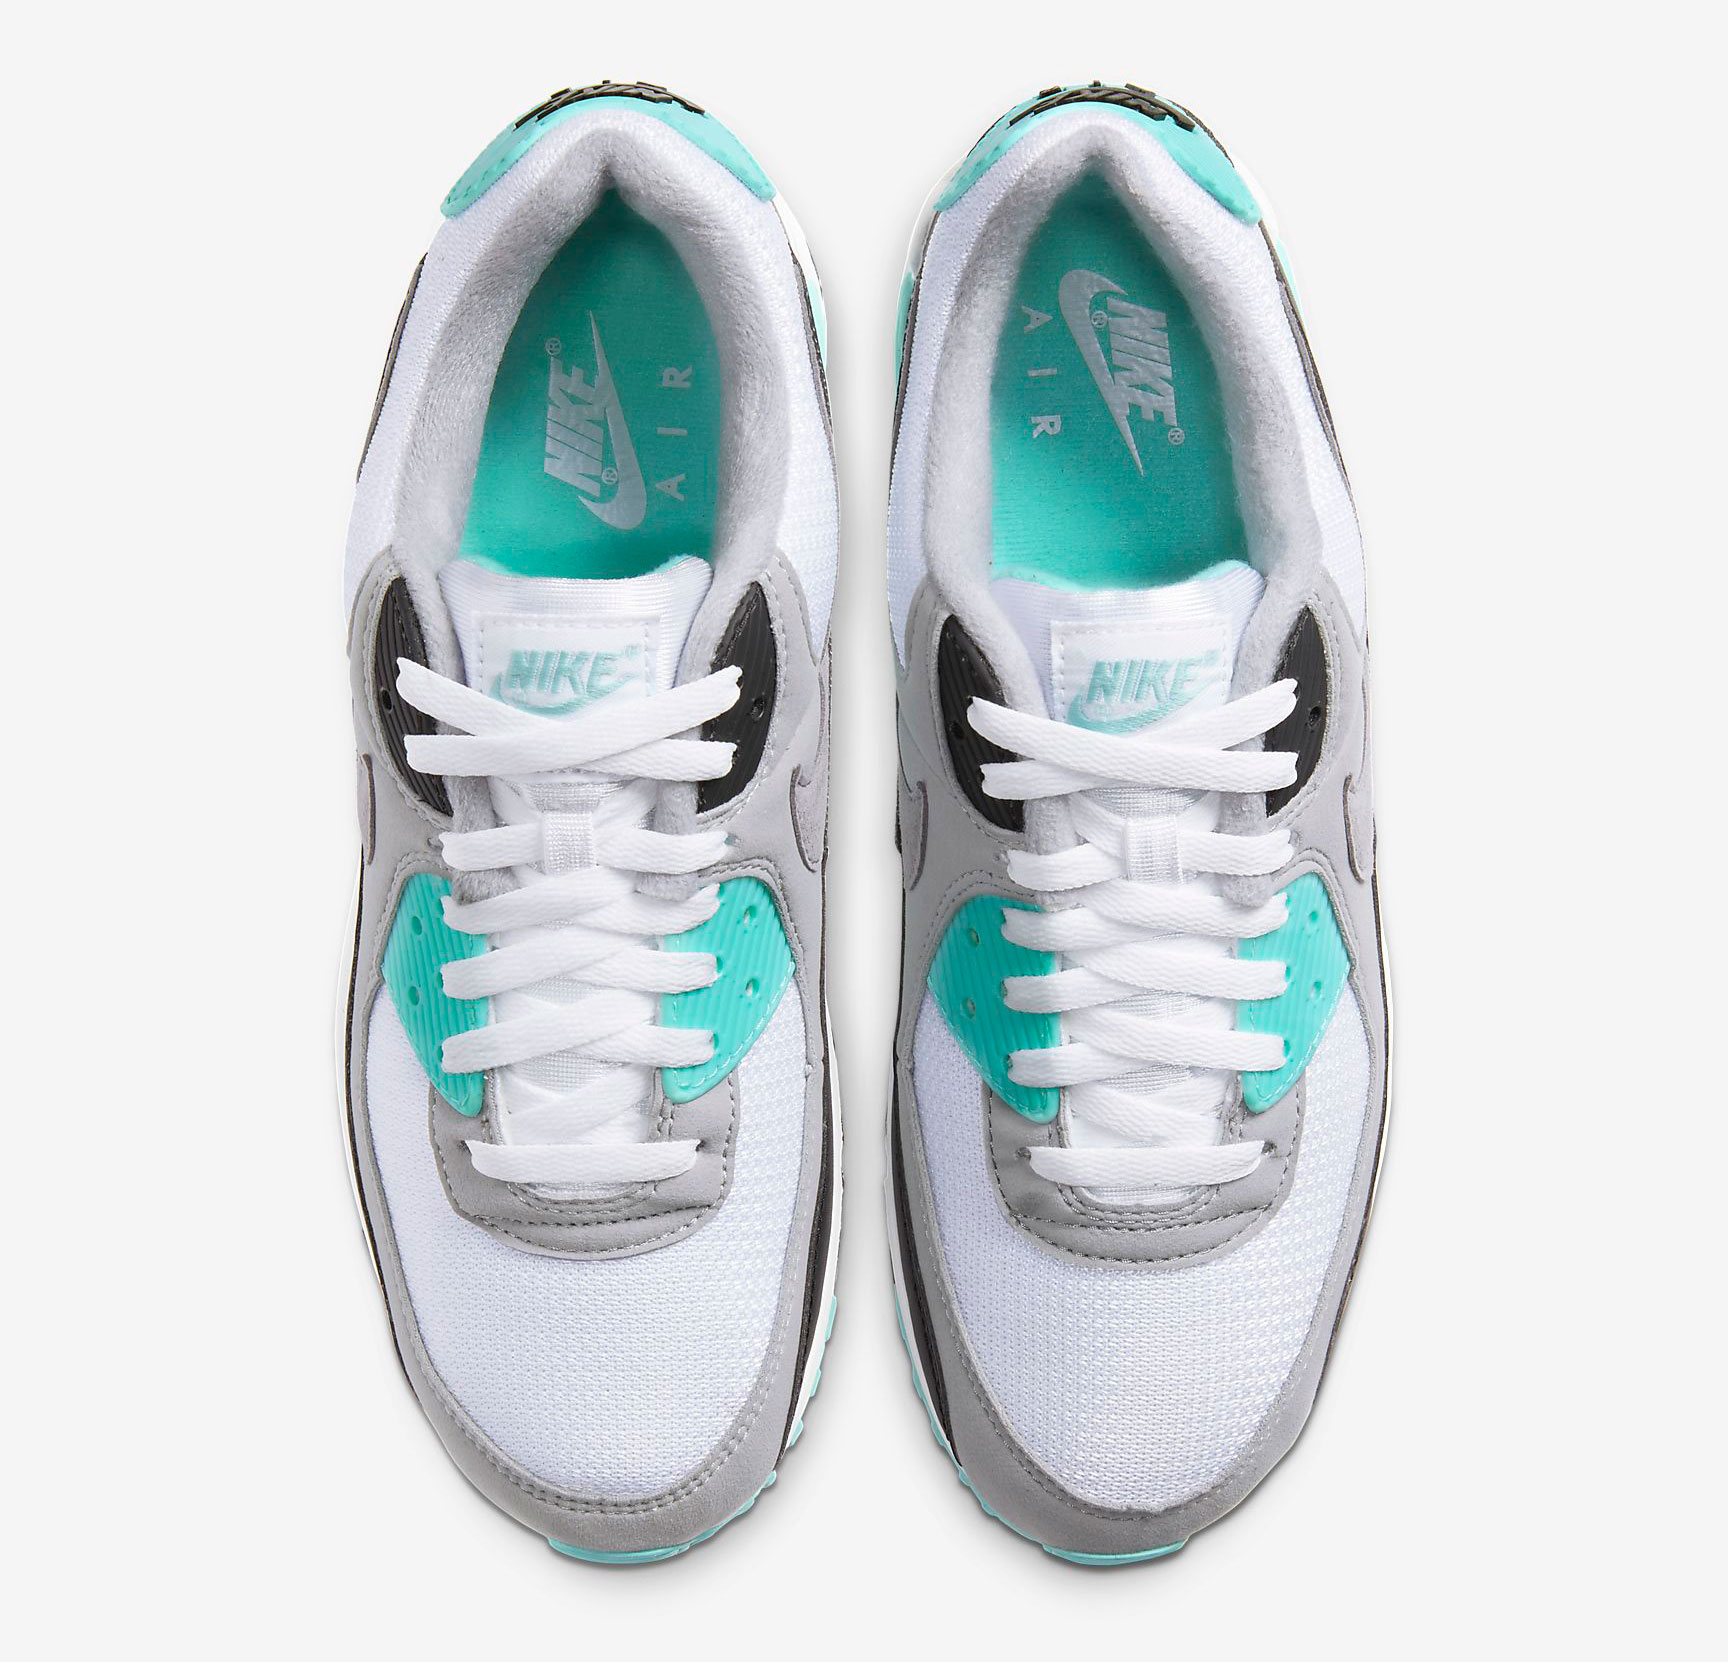 nike-air-max-90-hyper-turquoise-release-date-price-4